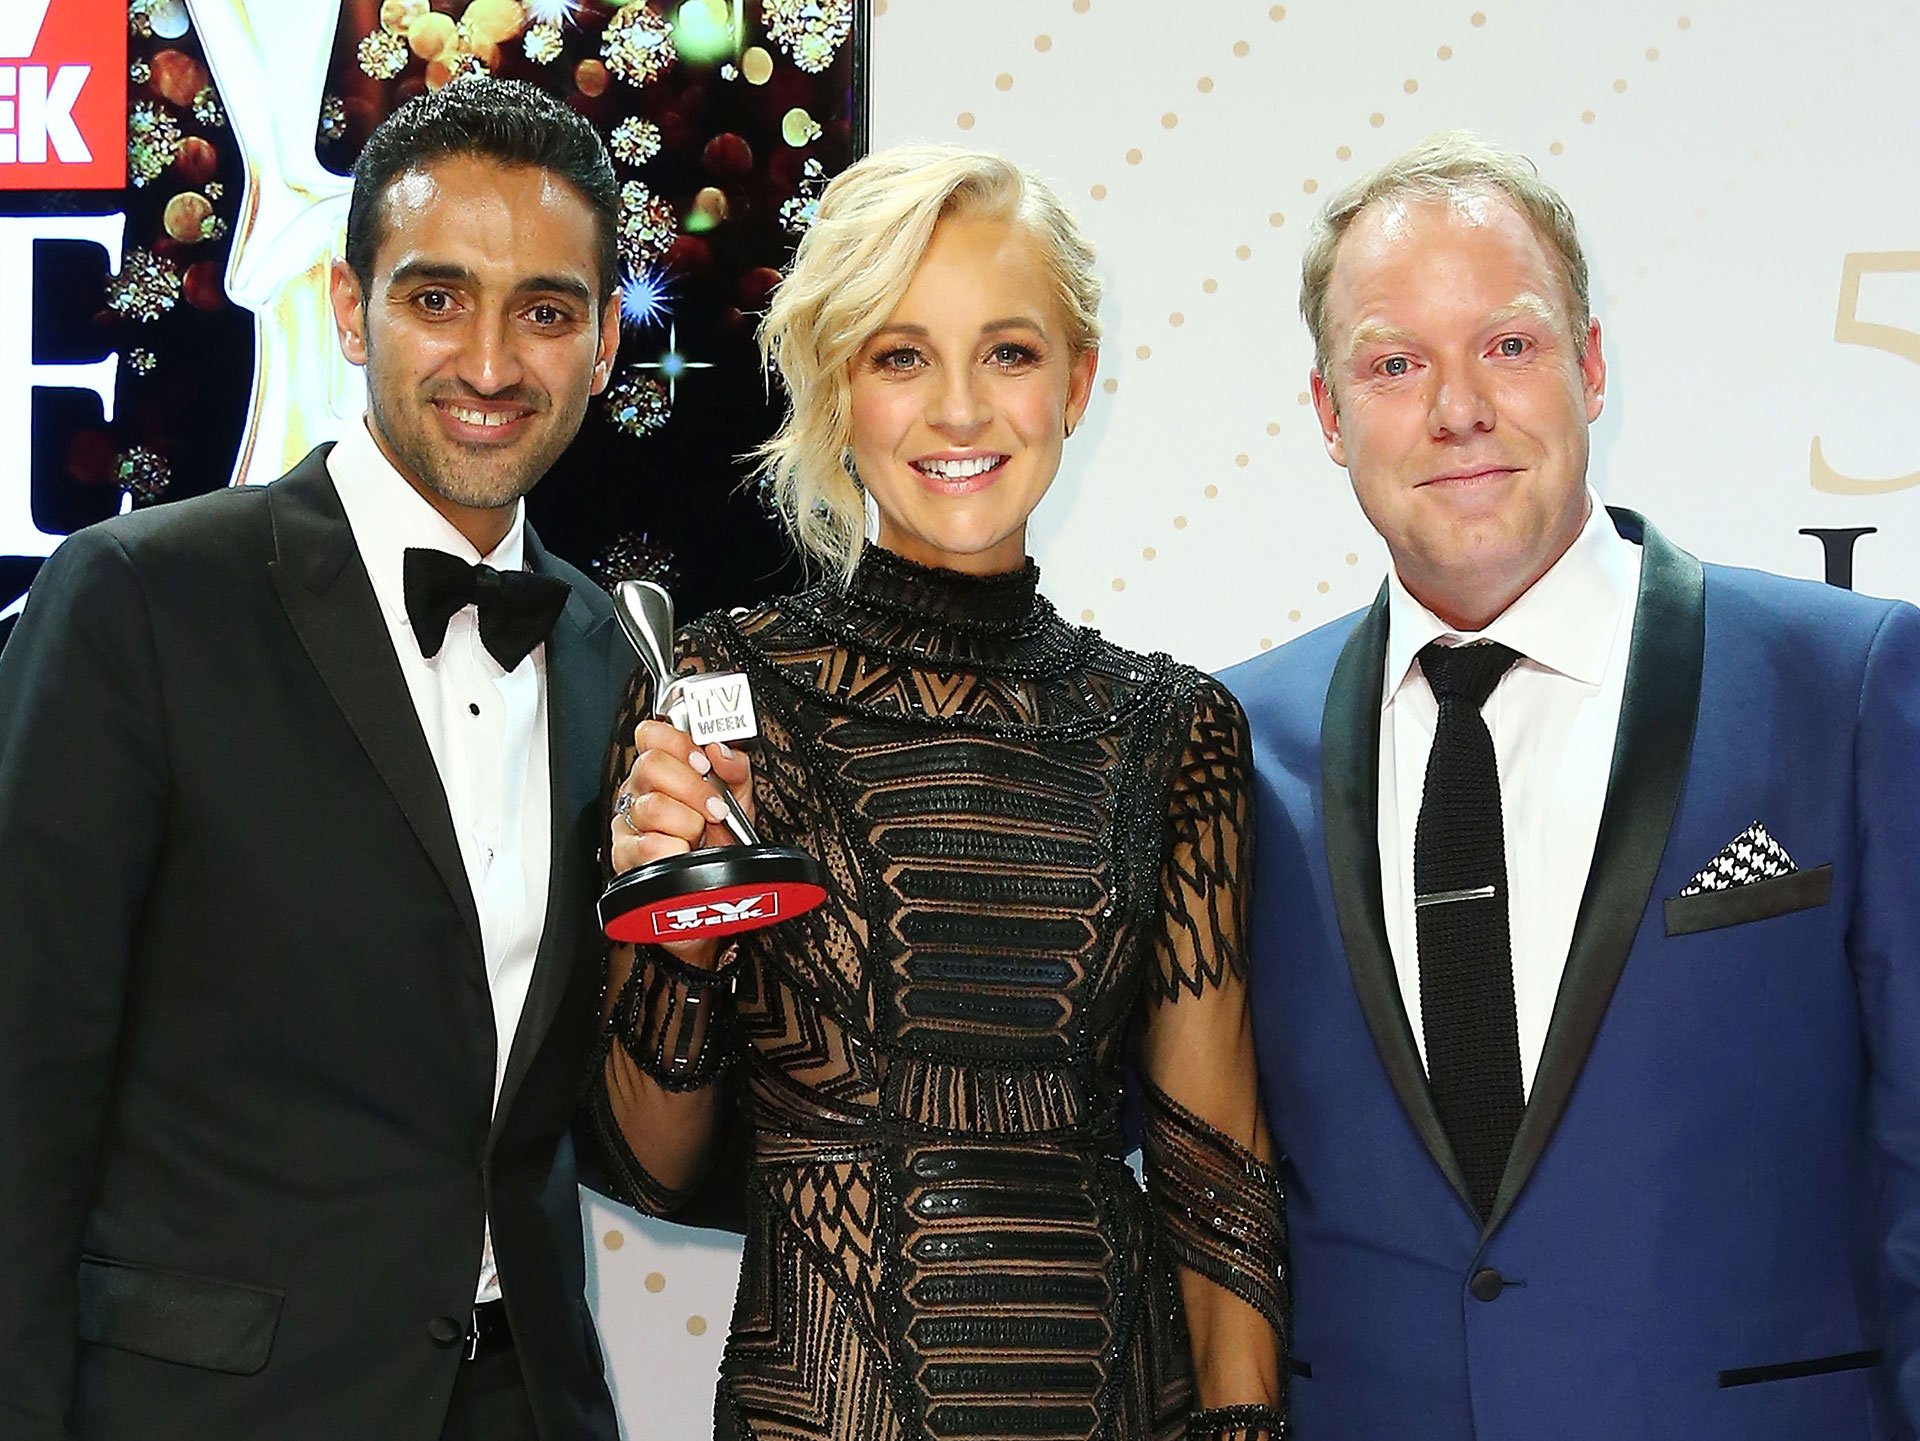 The Project's Carrie Bickmore, Waleed Aly and Peter Helliar